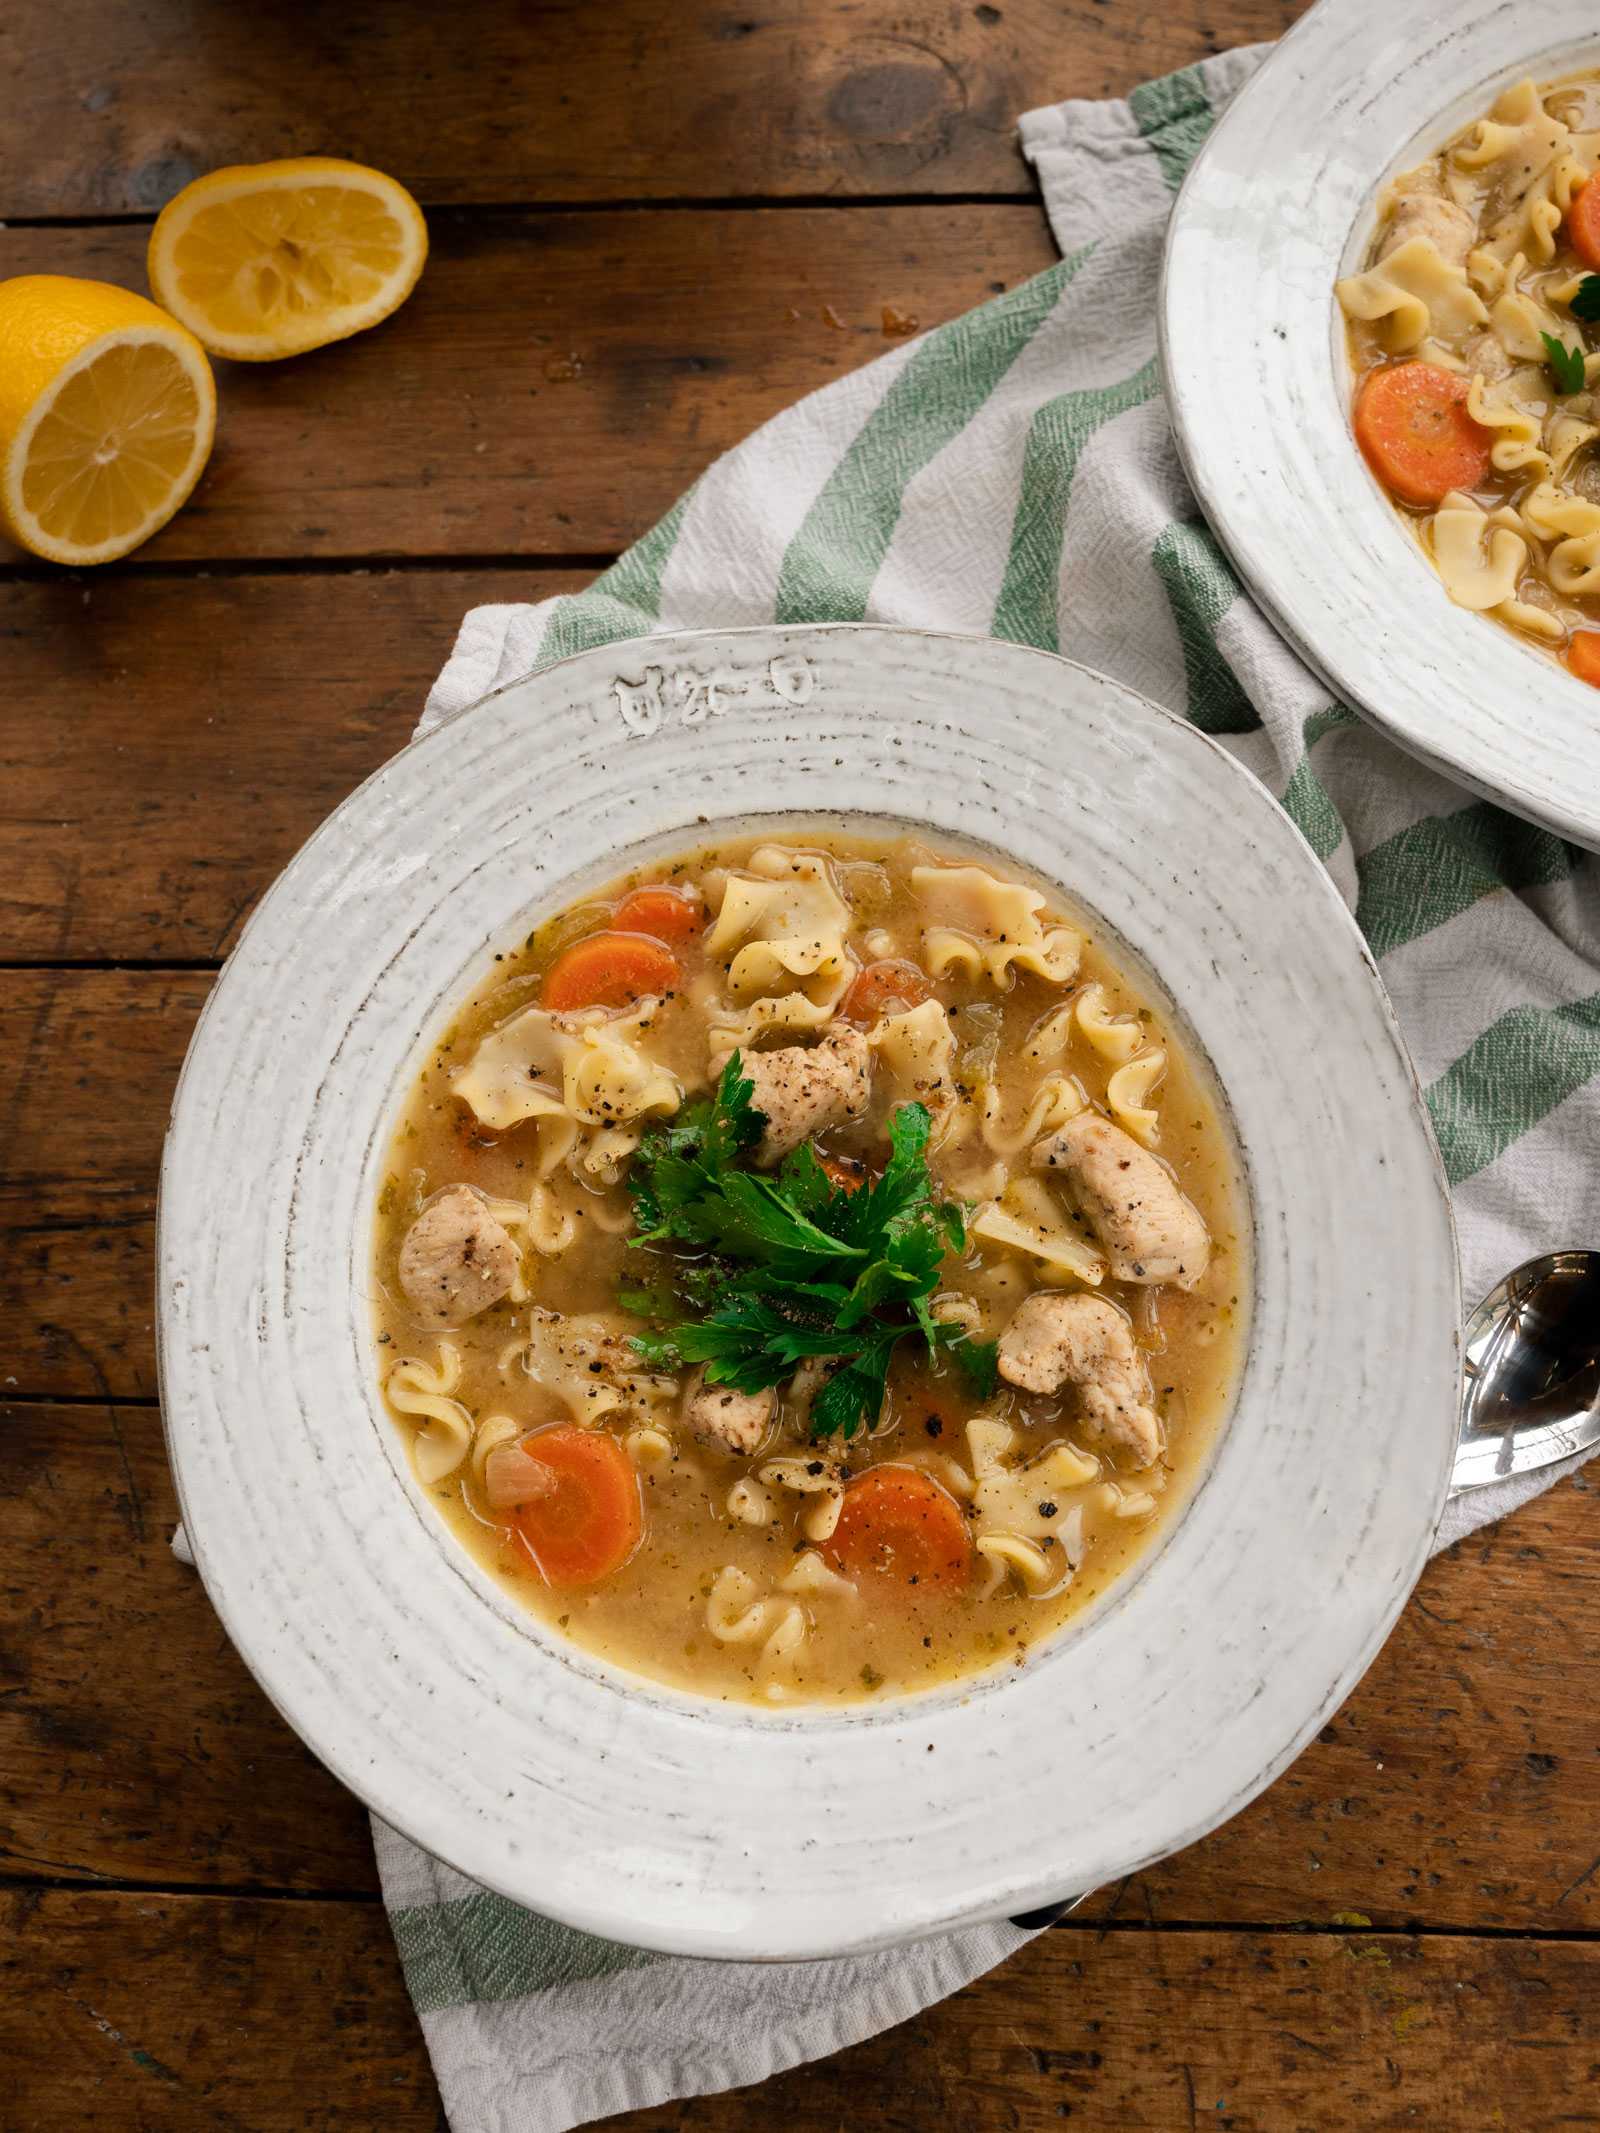 Here is a bowl of Oliver-made chicken noodle soup, sitting on a wood harvest table on top of a white & green striped tea towel.  This is a classic recipe that is cozy and delicious. This hearty soup will warm you up from the inside out. It is perfect on its own but also tastes great accompanied with fresh bread.